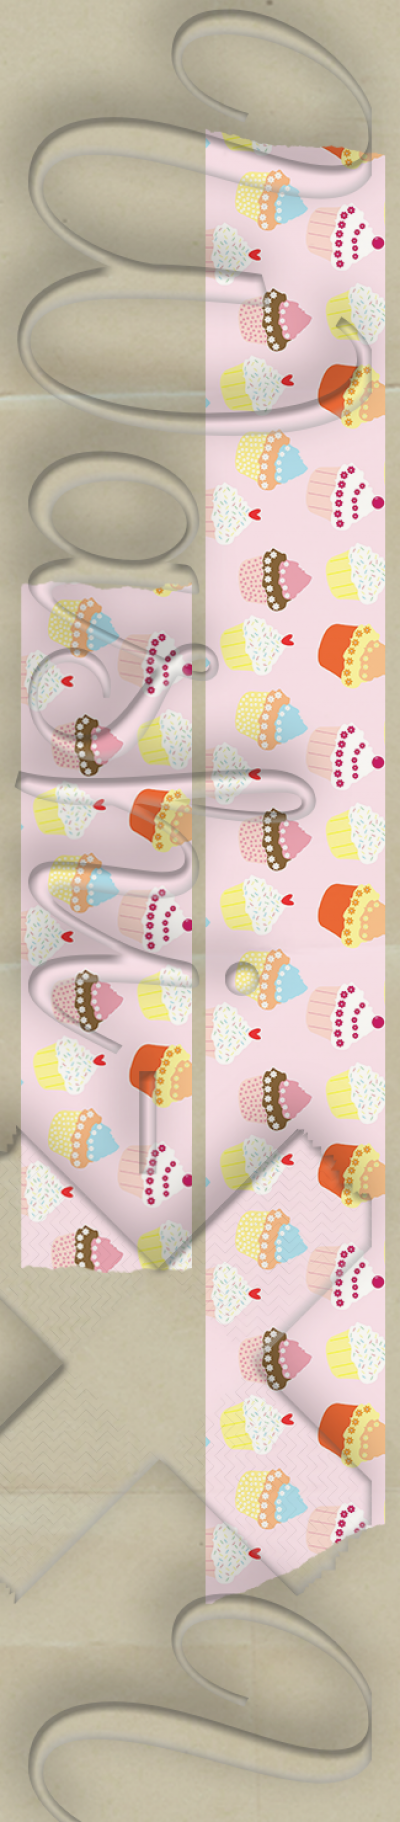 Cupcakes patterned washi tape